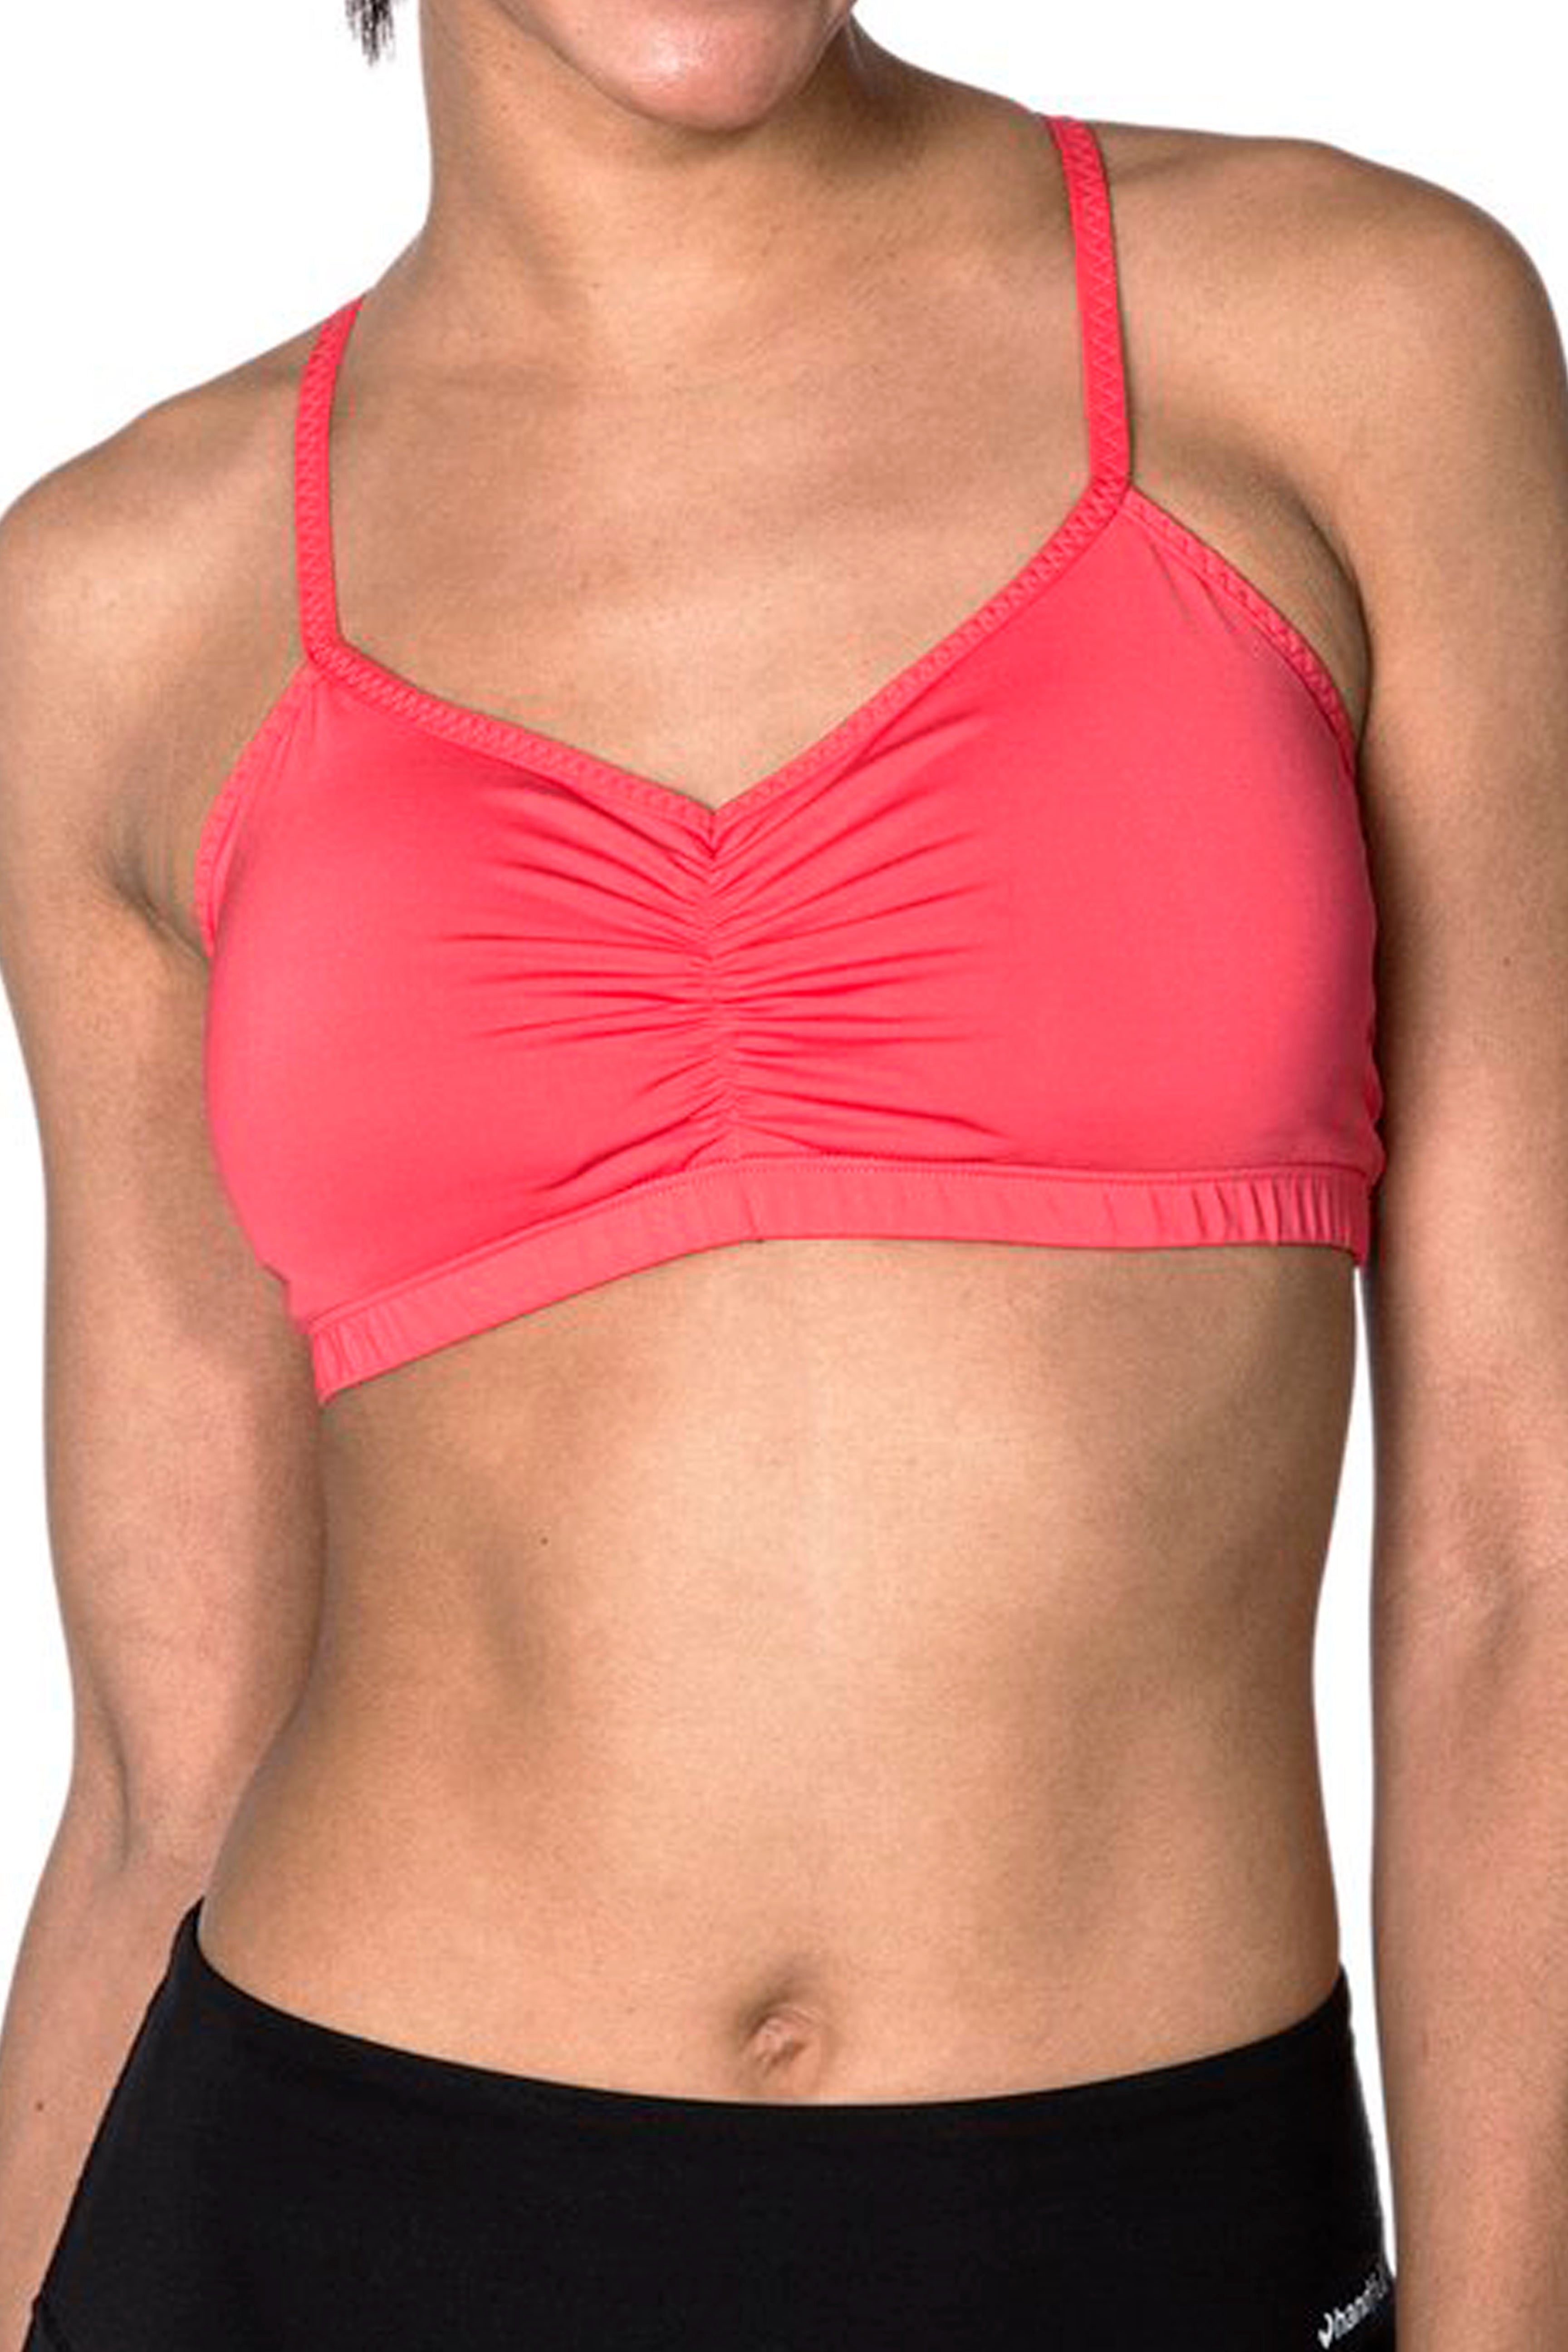 Wholesale bra with shoulder pads built in For Supportive Underwear 